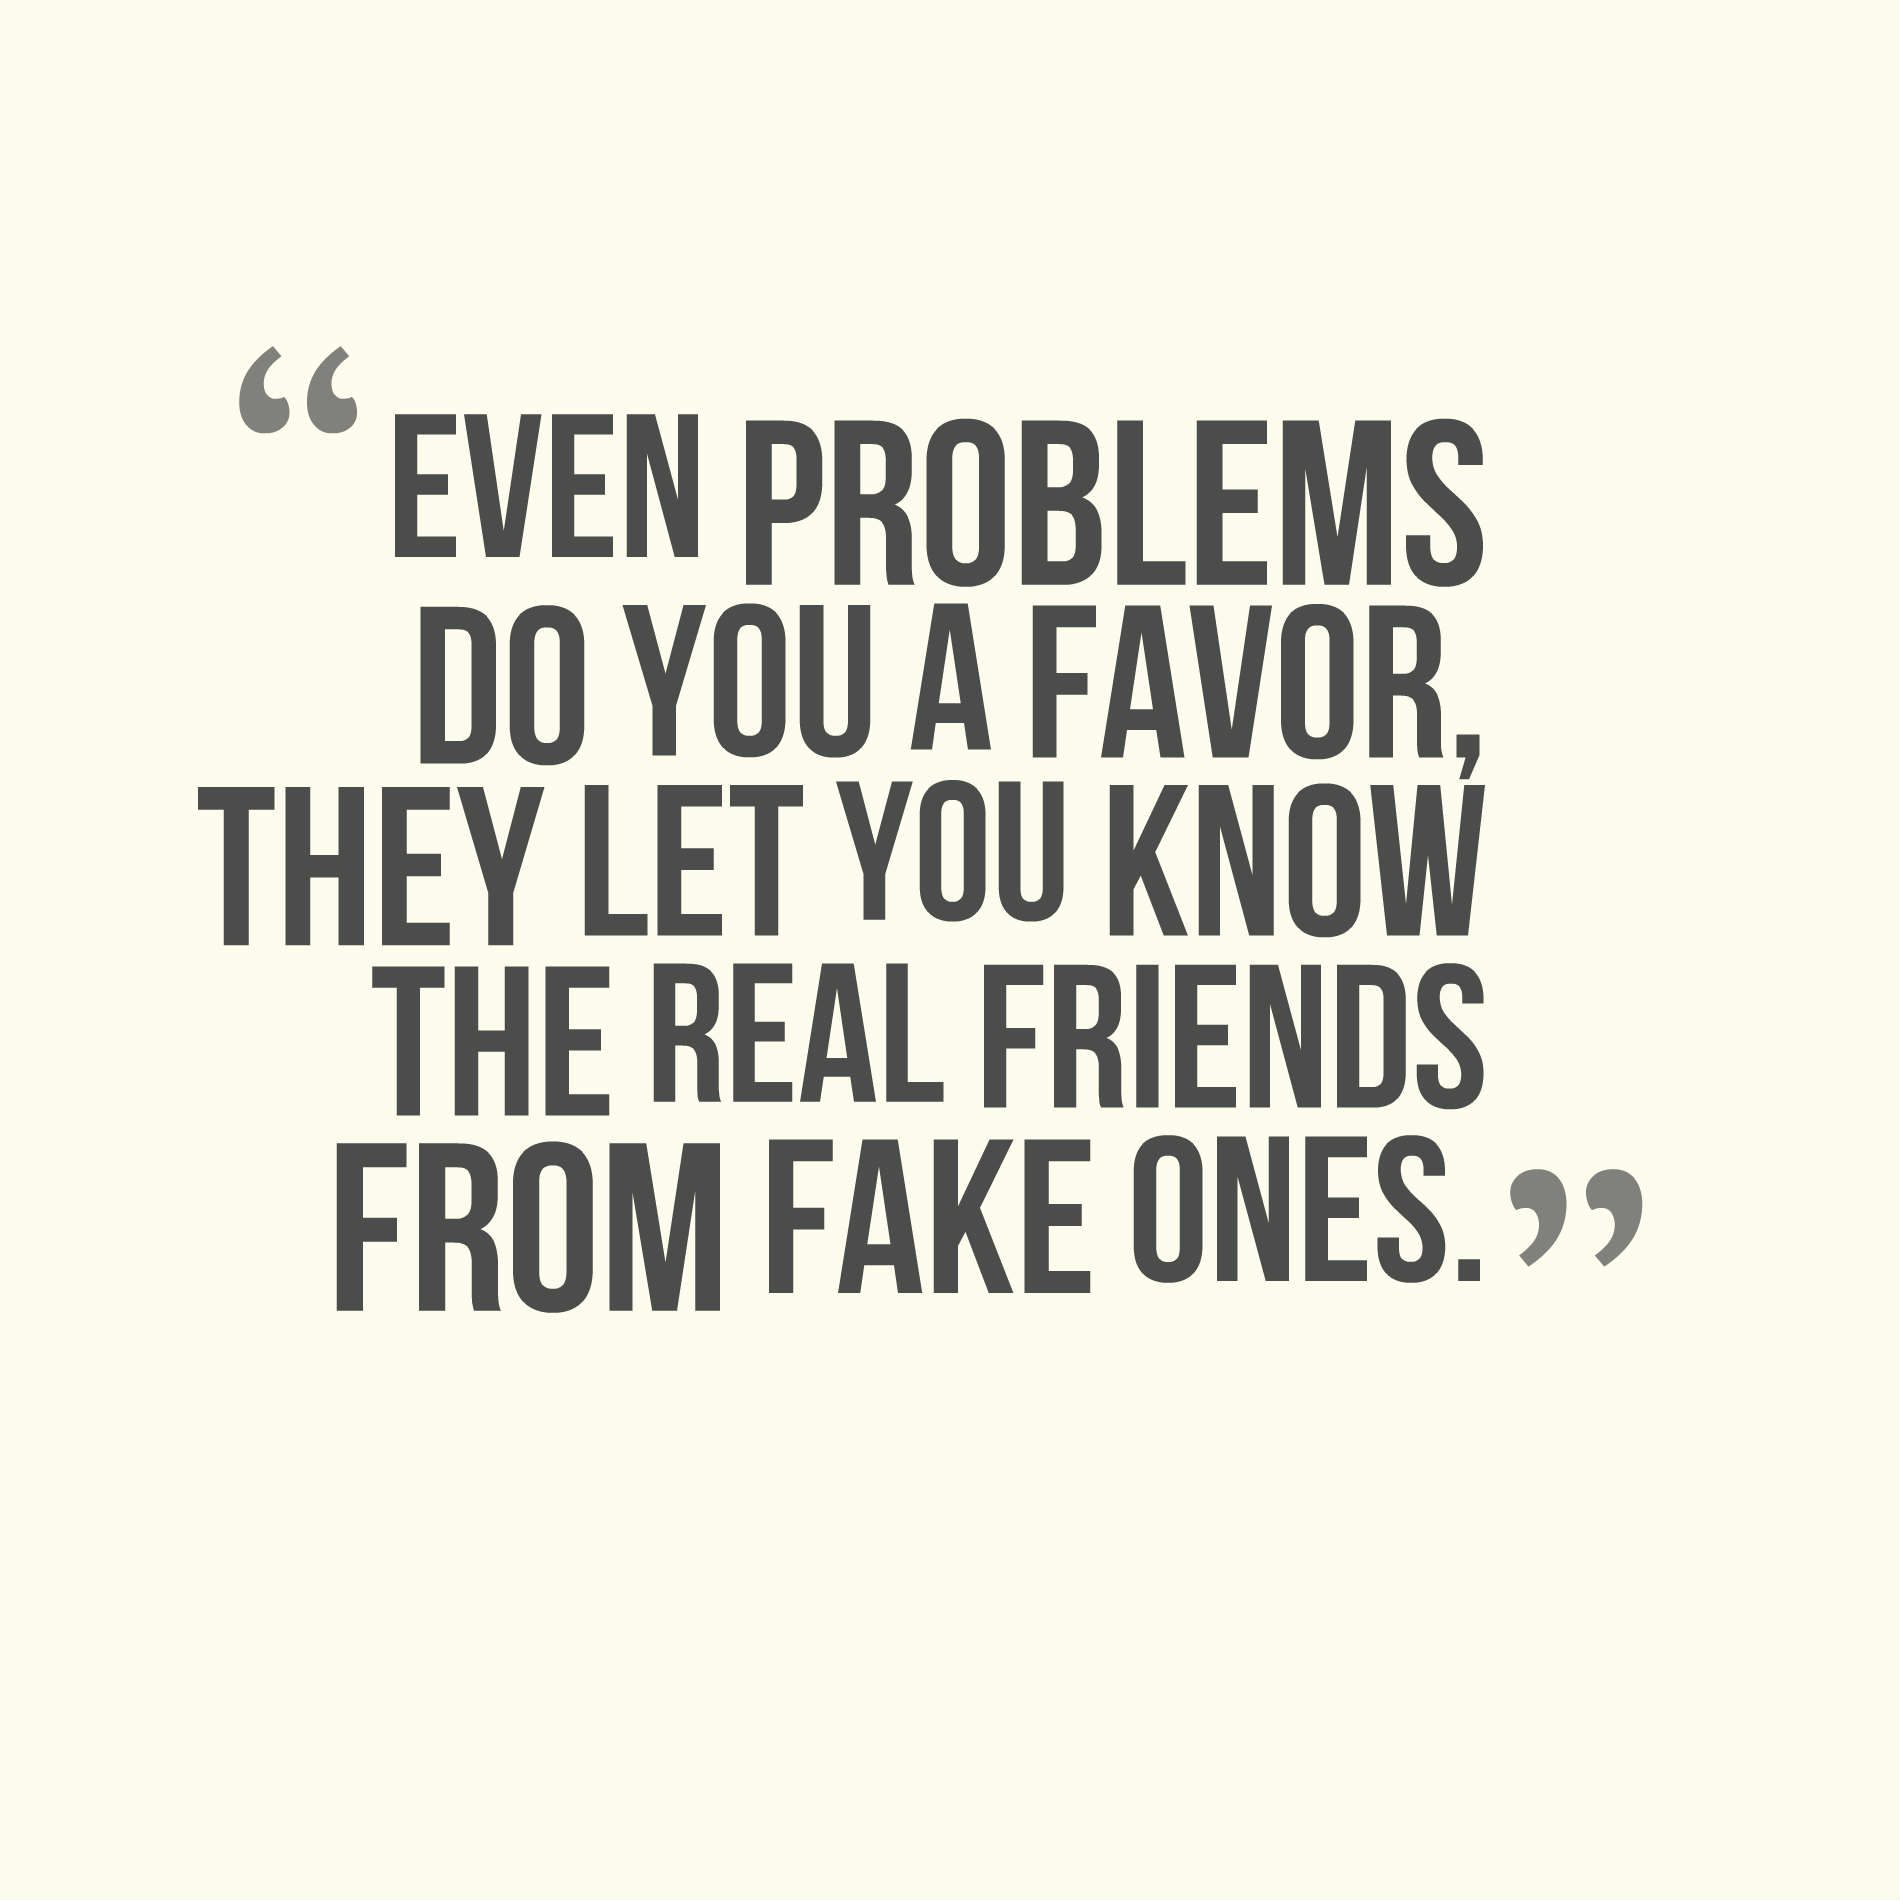 Even problems do you a favor, they let you know the real friends from fake ones.